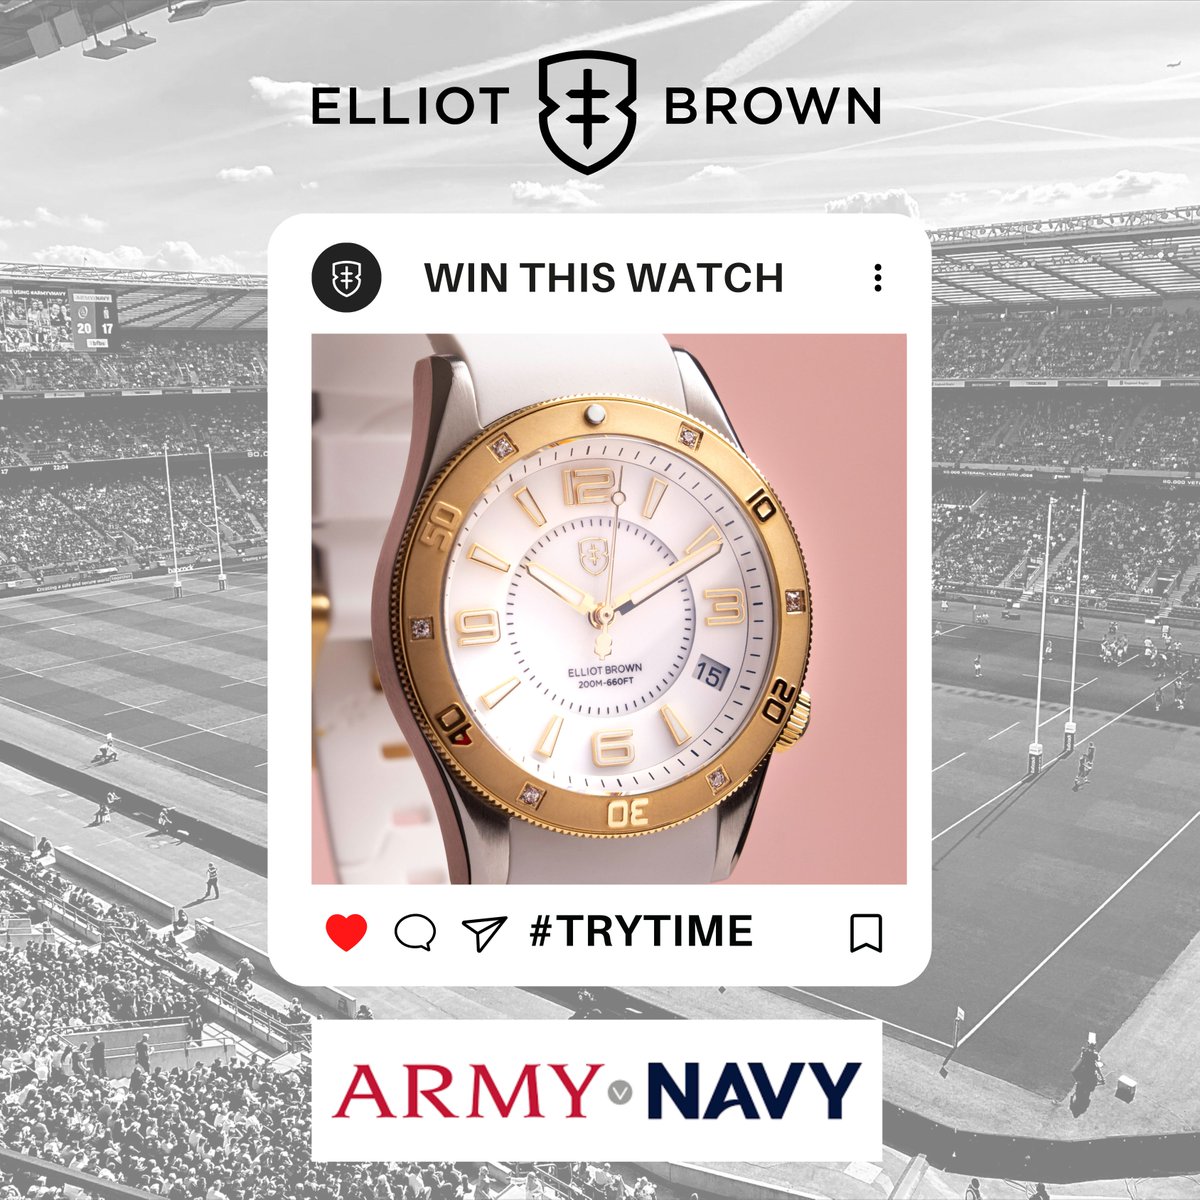 #trytime & WIN * Guess the time the first try is scored ; in minutes and seconds, for Men’s and Women’s game. * Use #trytime & leave your guess time in comments stipulating the Men’s or Women’s Game.  * Winners will be announced after each game, closest answer wins #armynavy